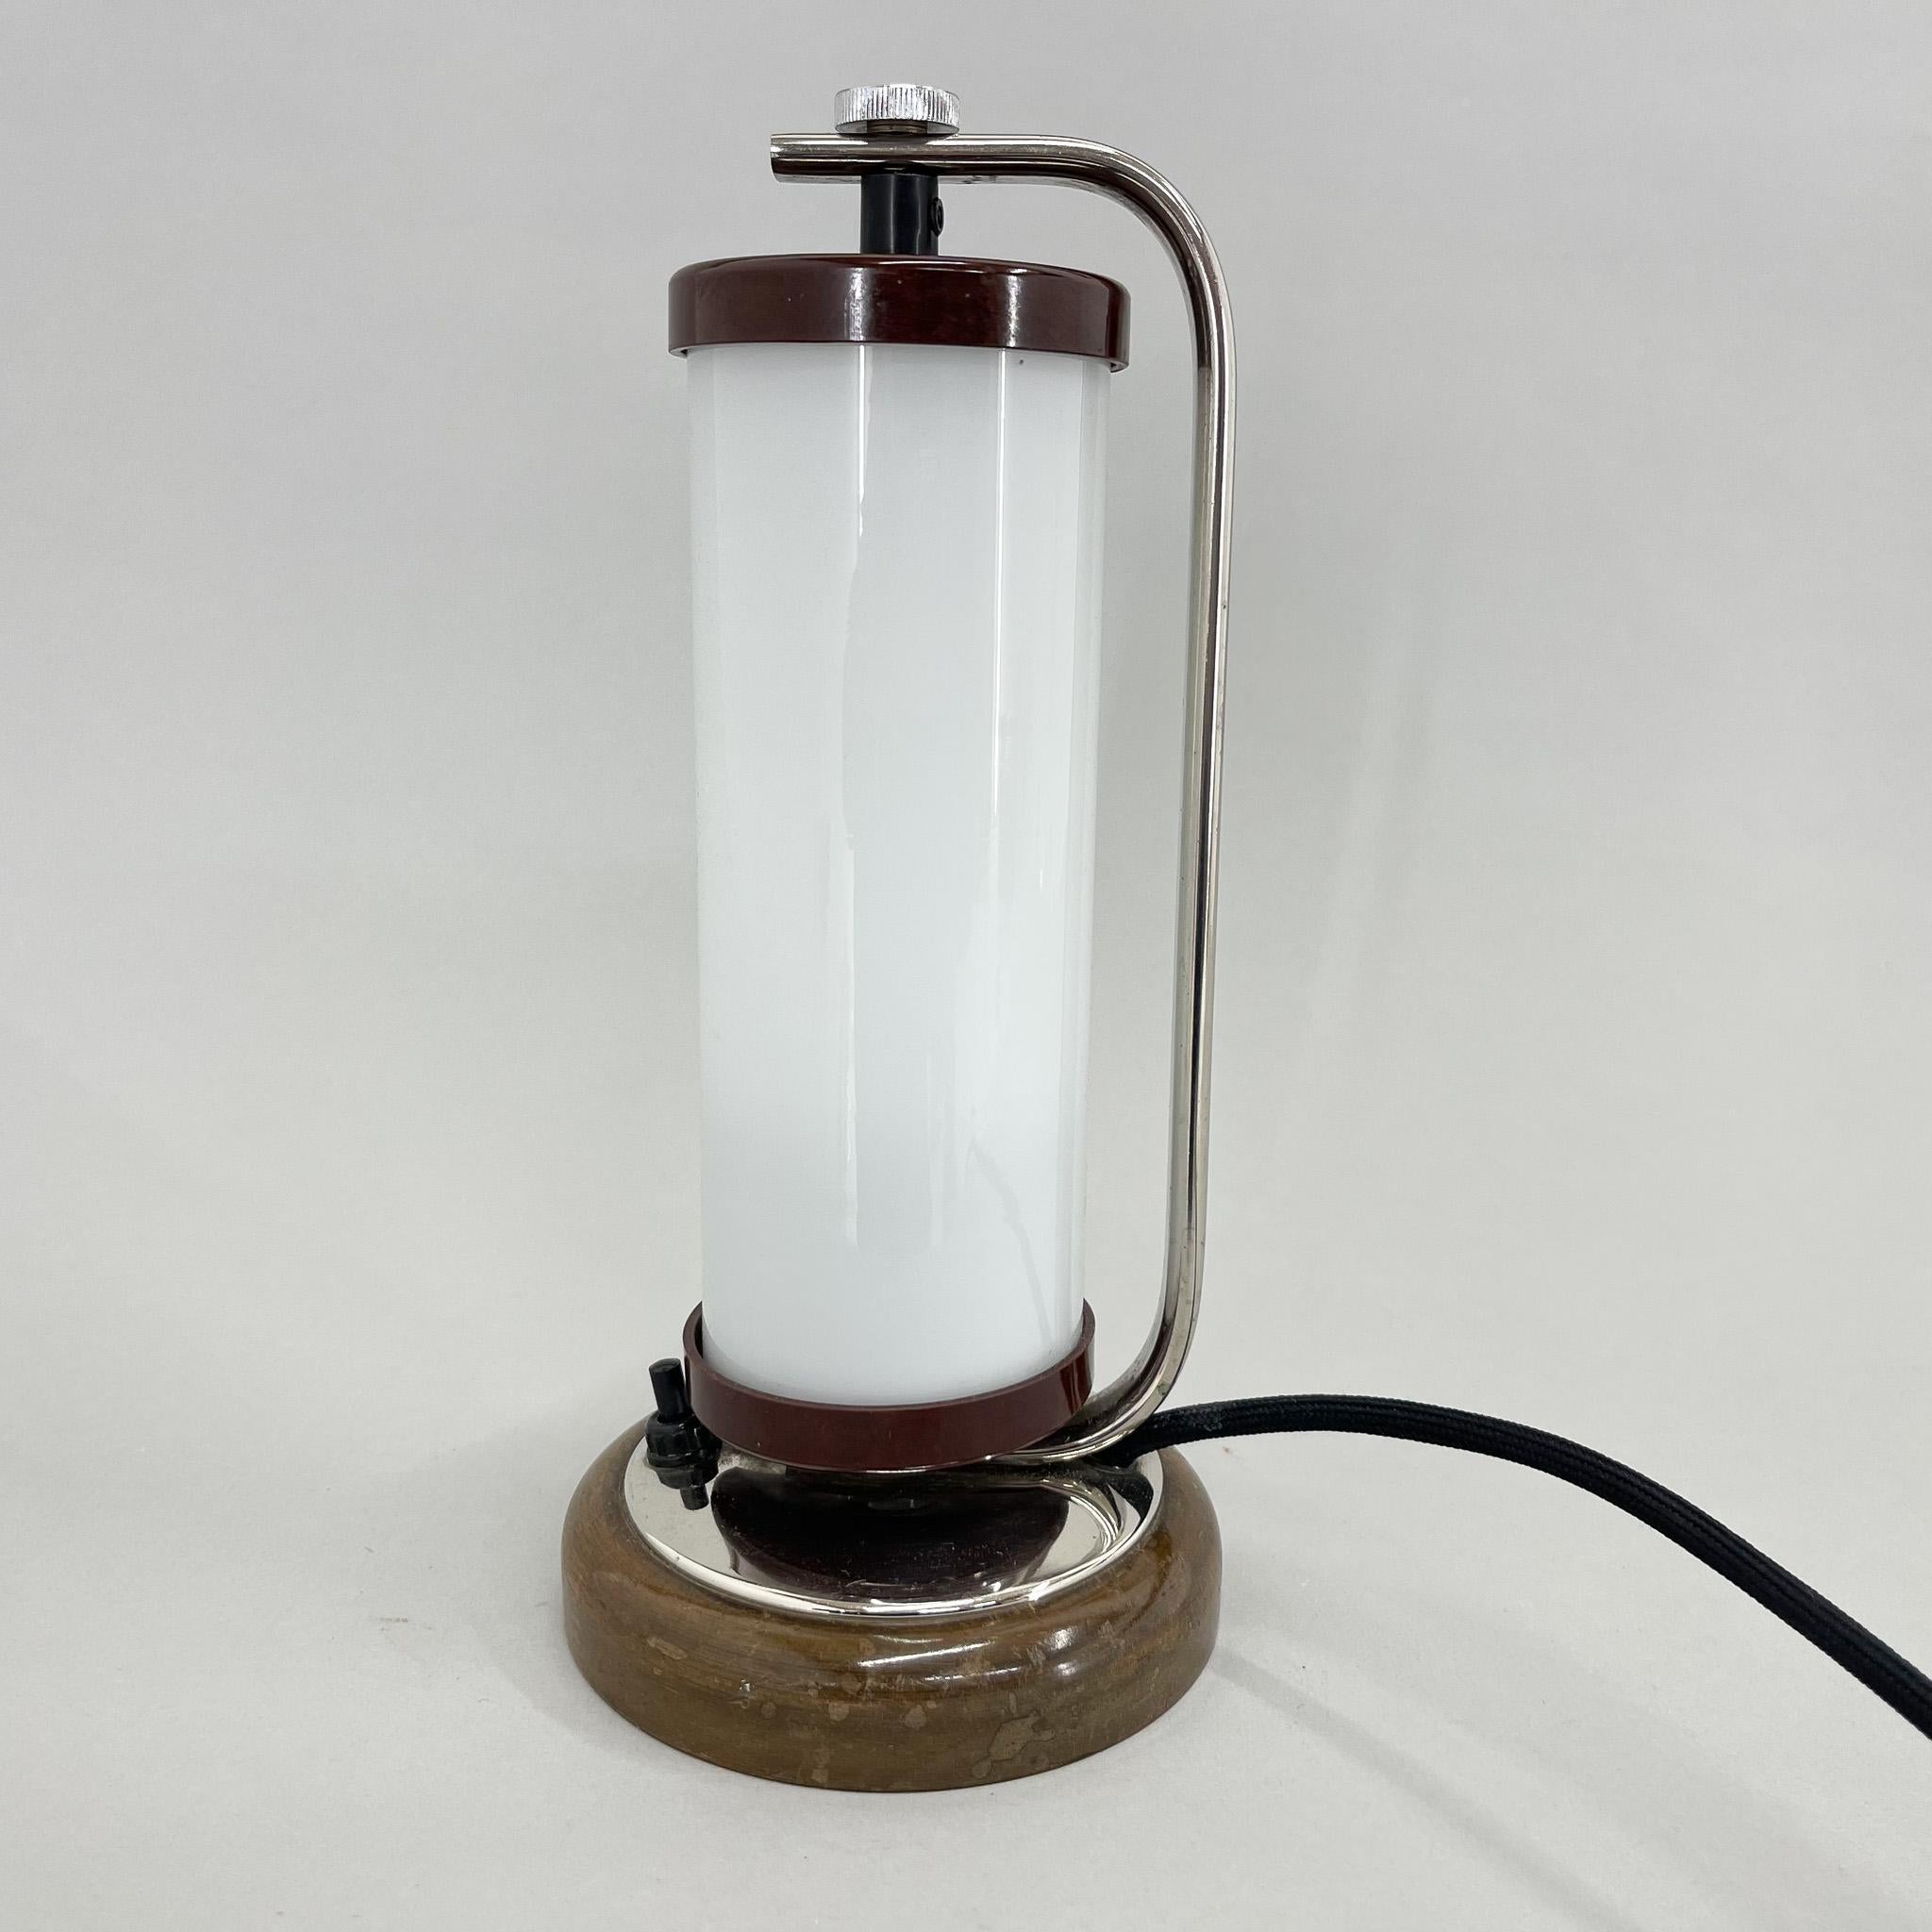 Unusual combination of chrome, wood and bakelite turns this little lamp into a unique piece of lighting. Bulbs: 1x E25-27.